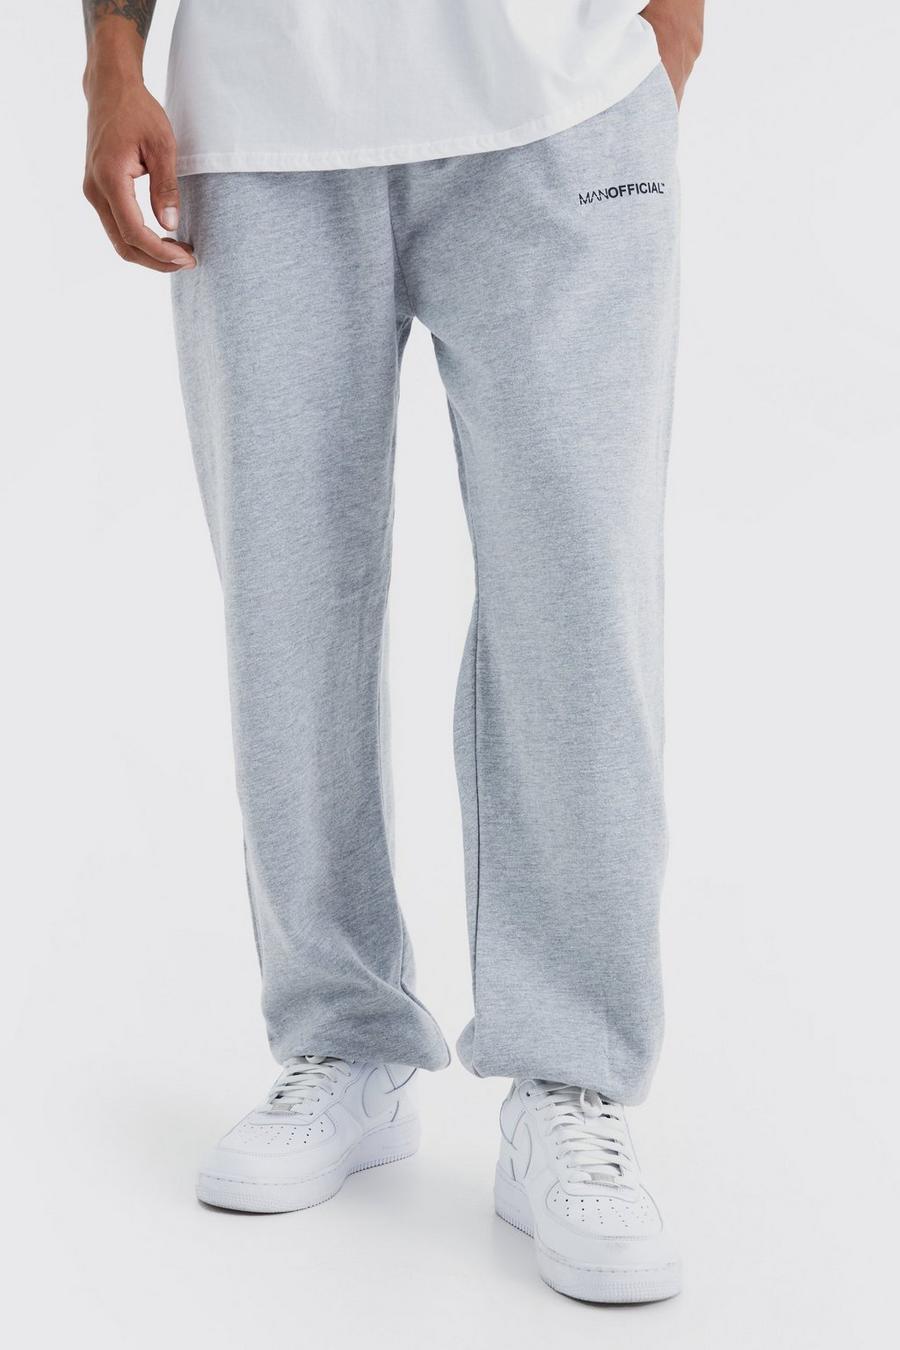 Grey Man Official Oversized Joggers image number 1